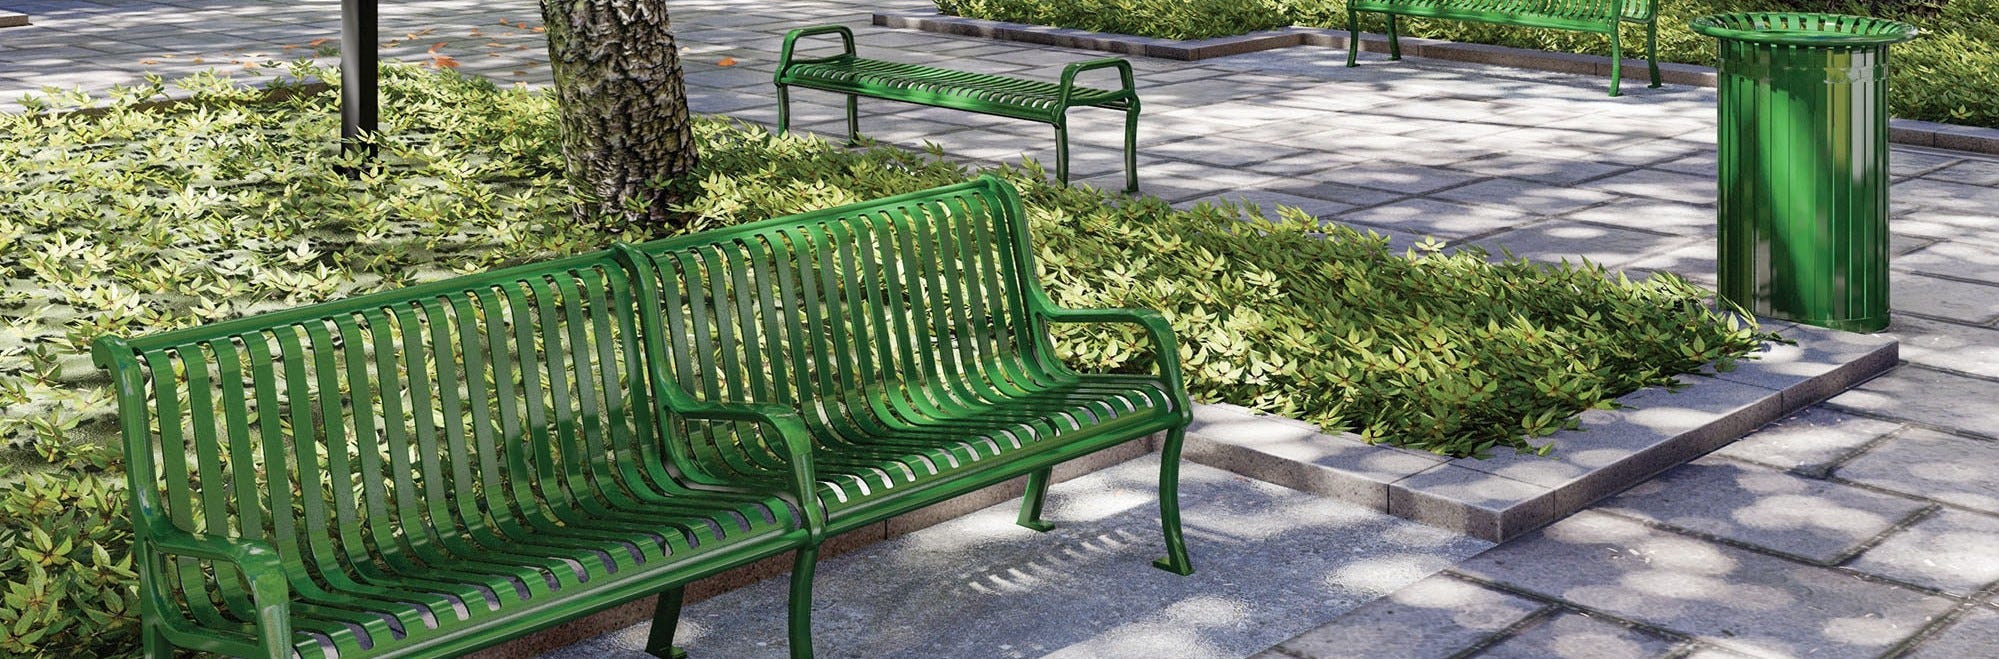 Six Park Accessories and Amenities Every Park Needs